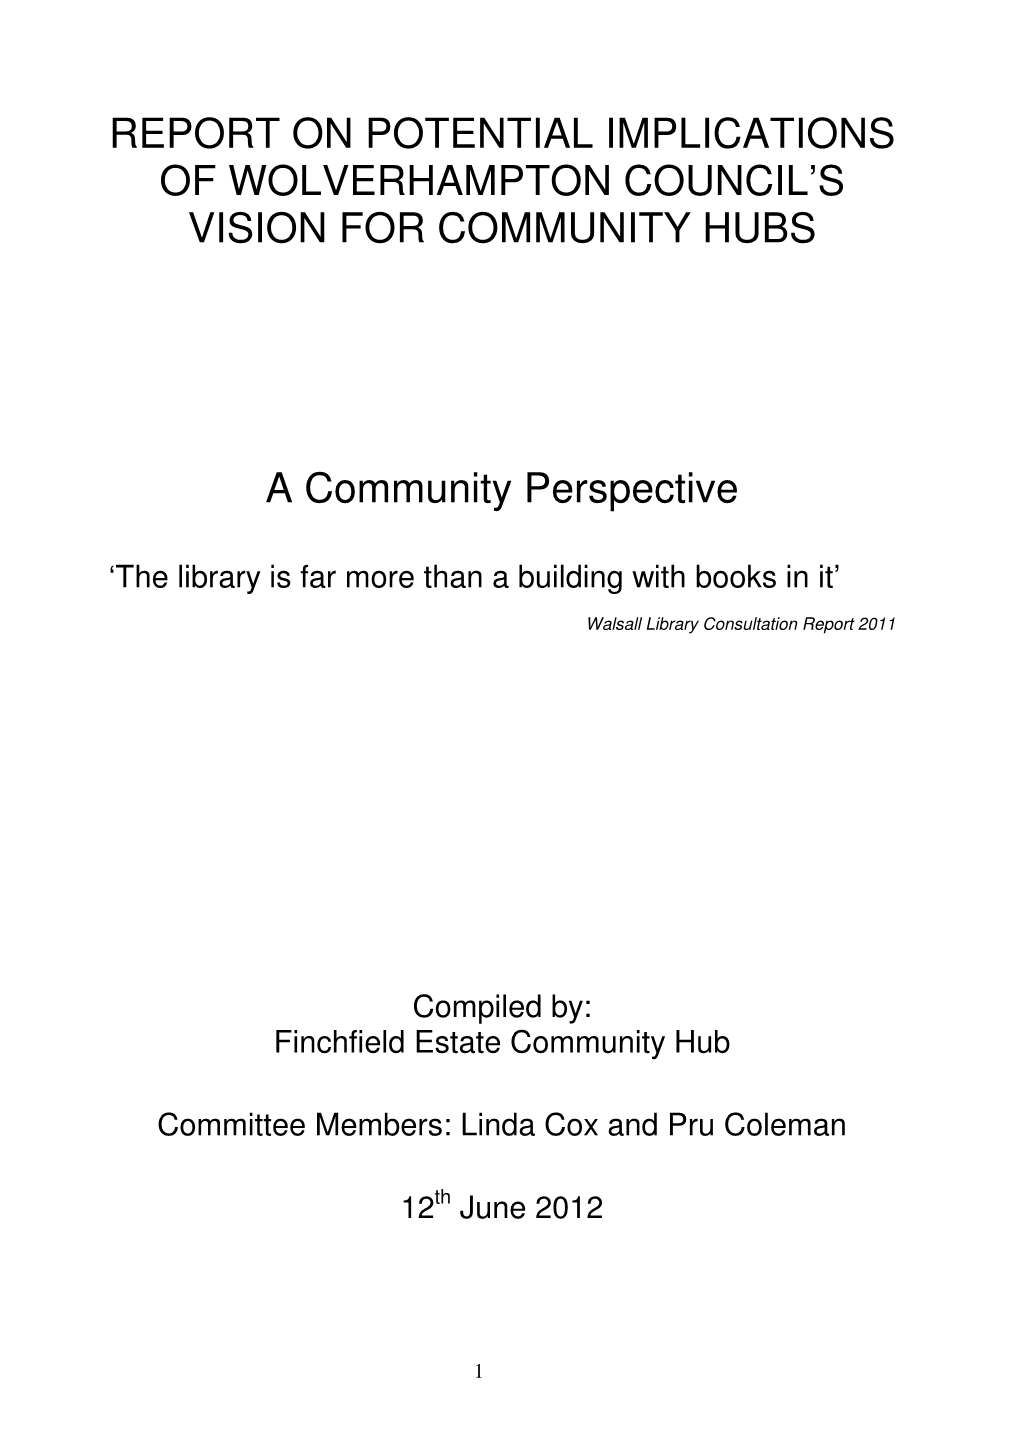 FECH Community Hubs and Libraries Report